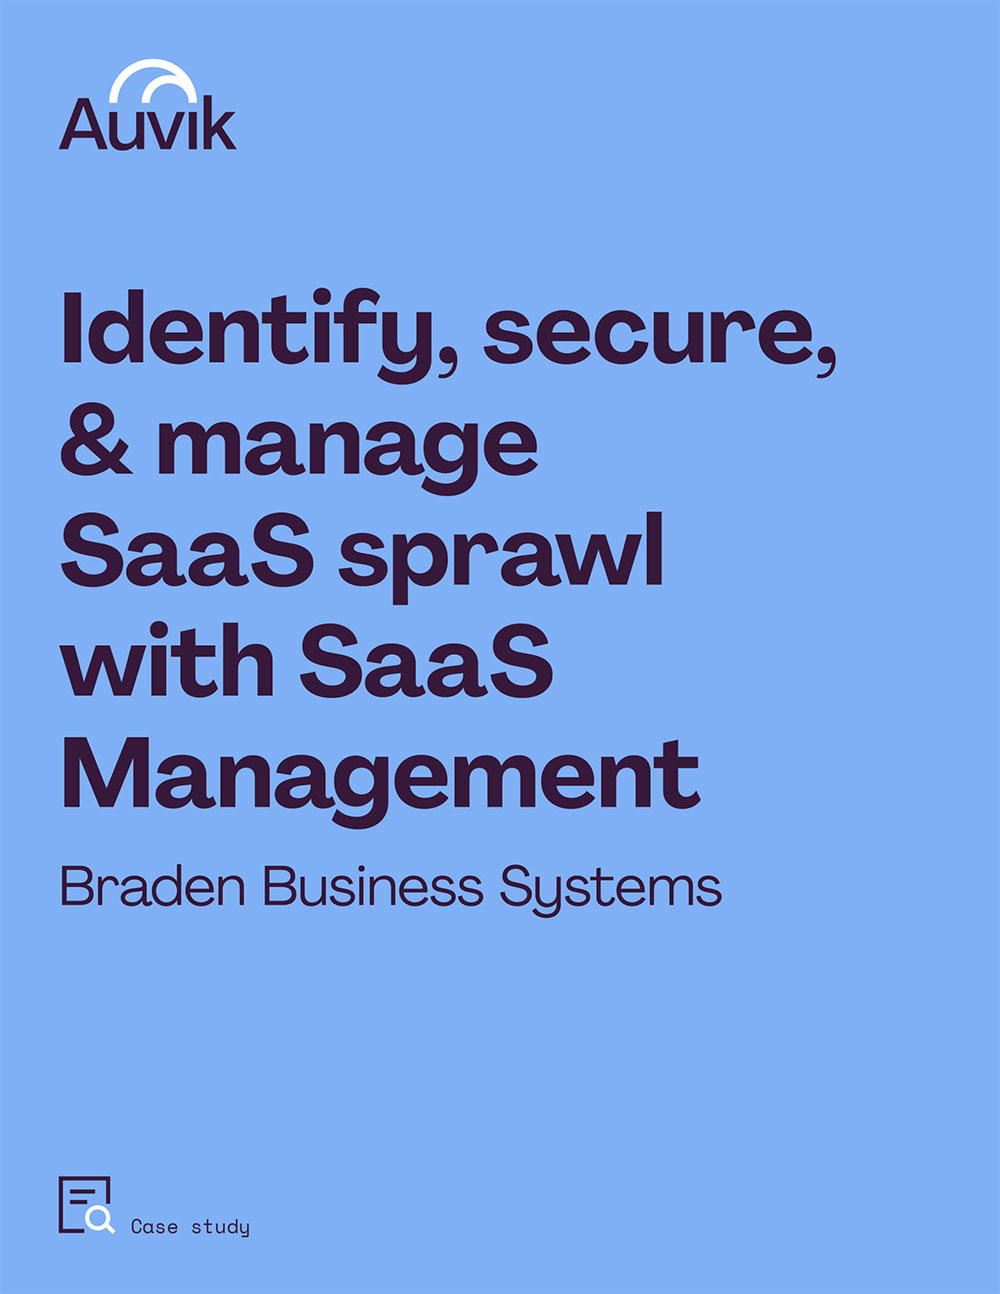 Image for Braden Business Systems